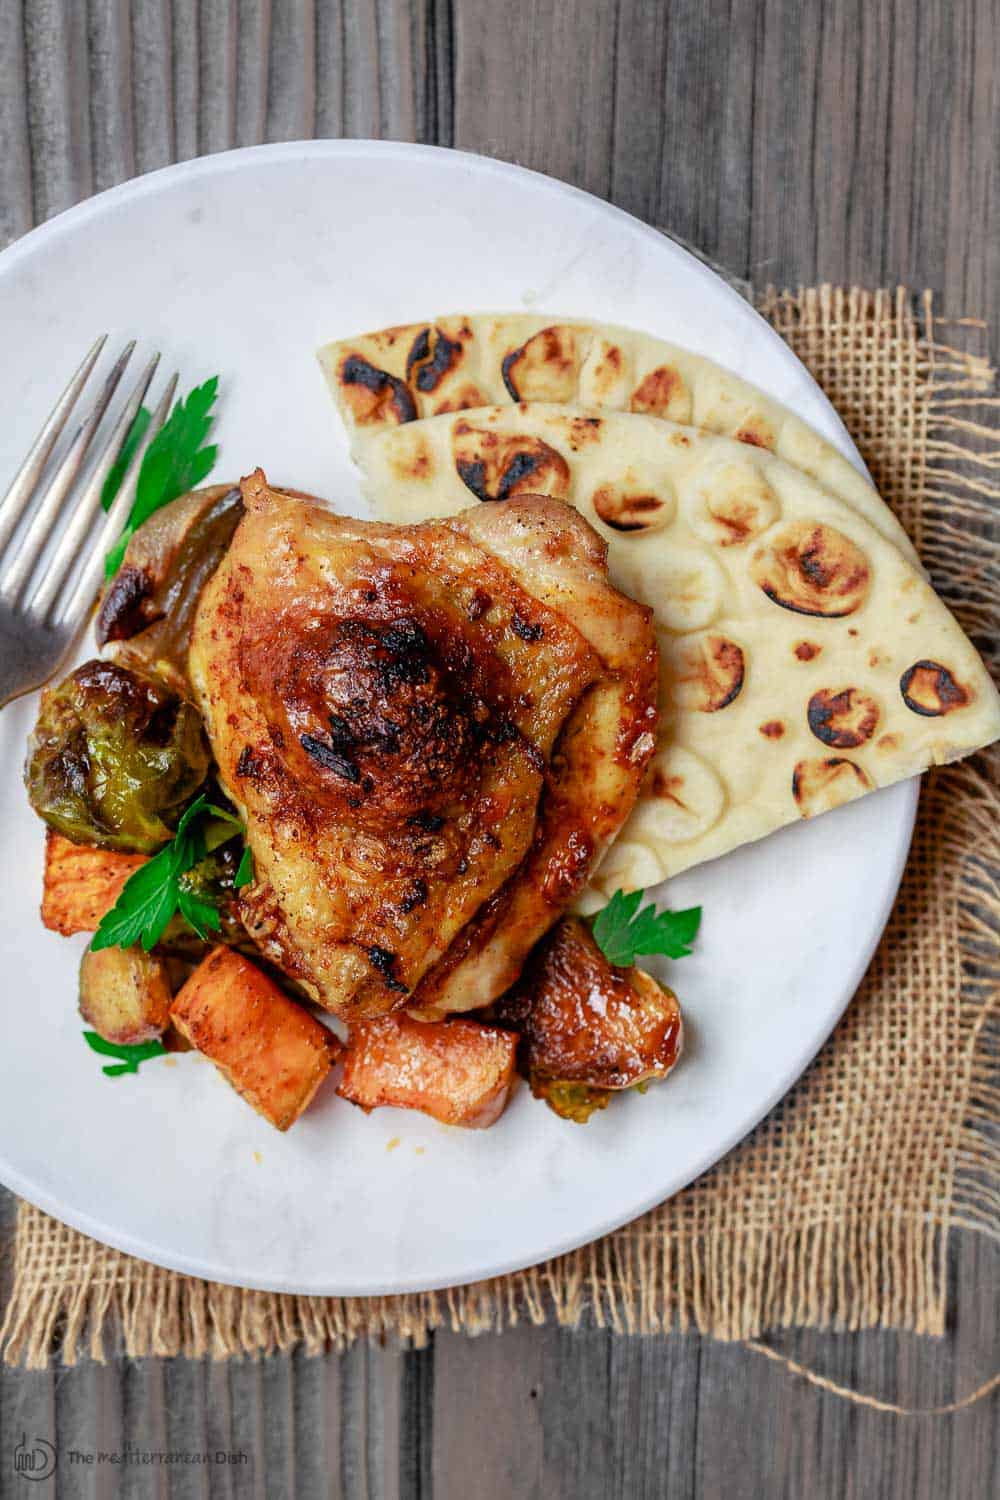 Chicken thigh, Vegetables and pita bread serves on a plate